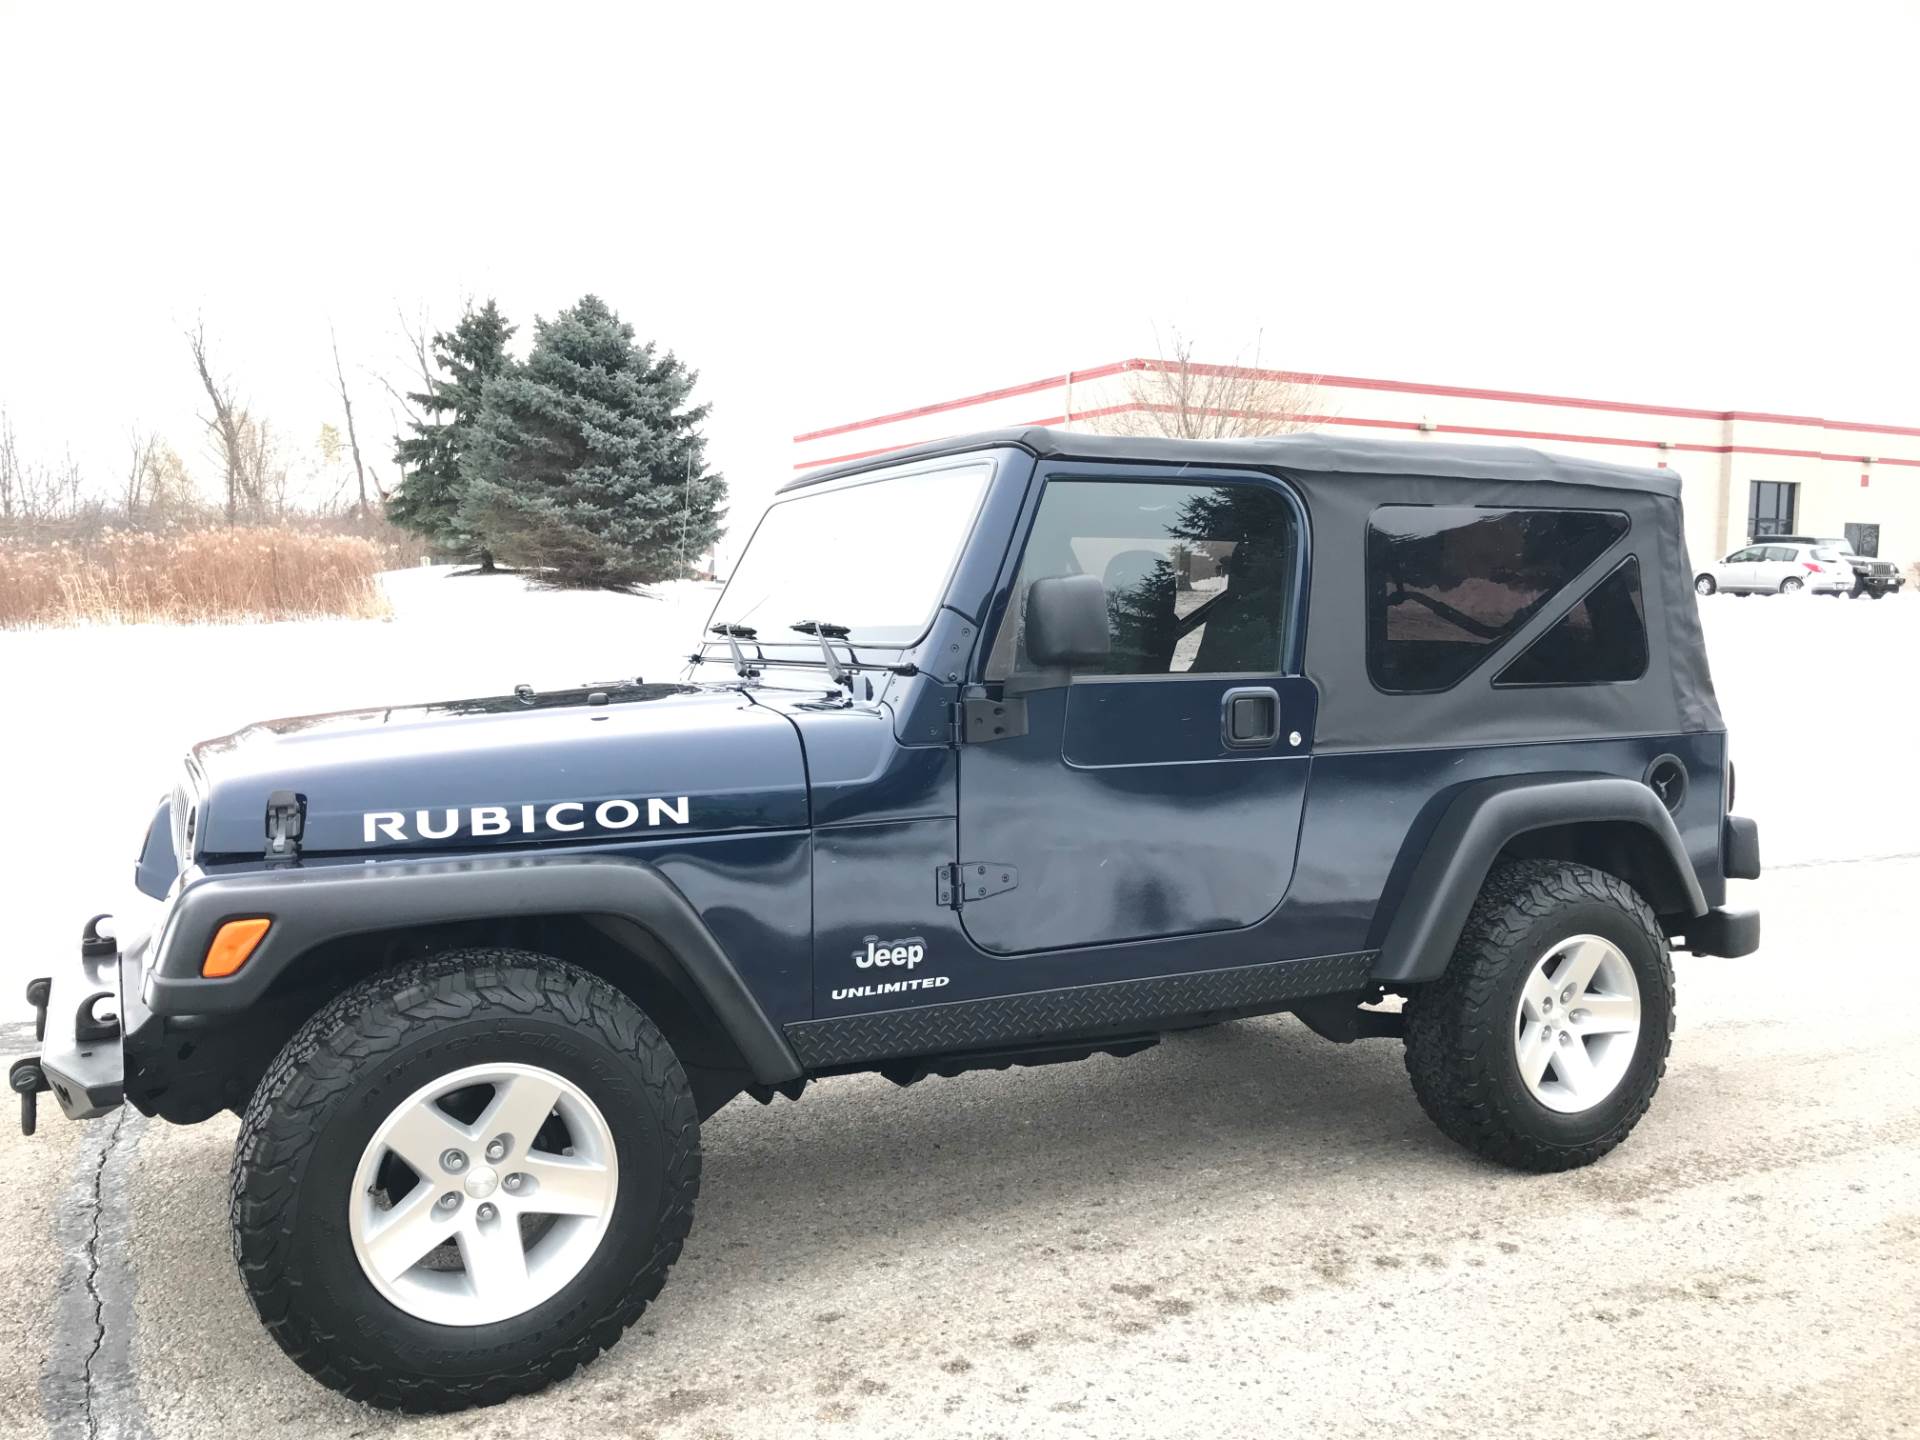 2006 Jeep Wrangler Unlimited Rubicon 2dr SUV 4WD in Big Bend, Wisconsin - Photo 113